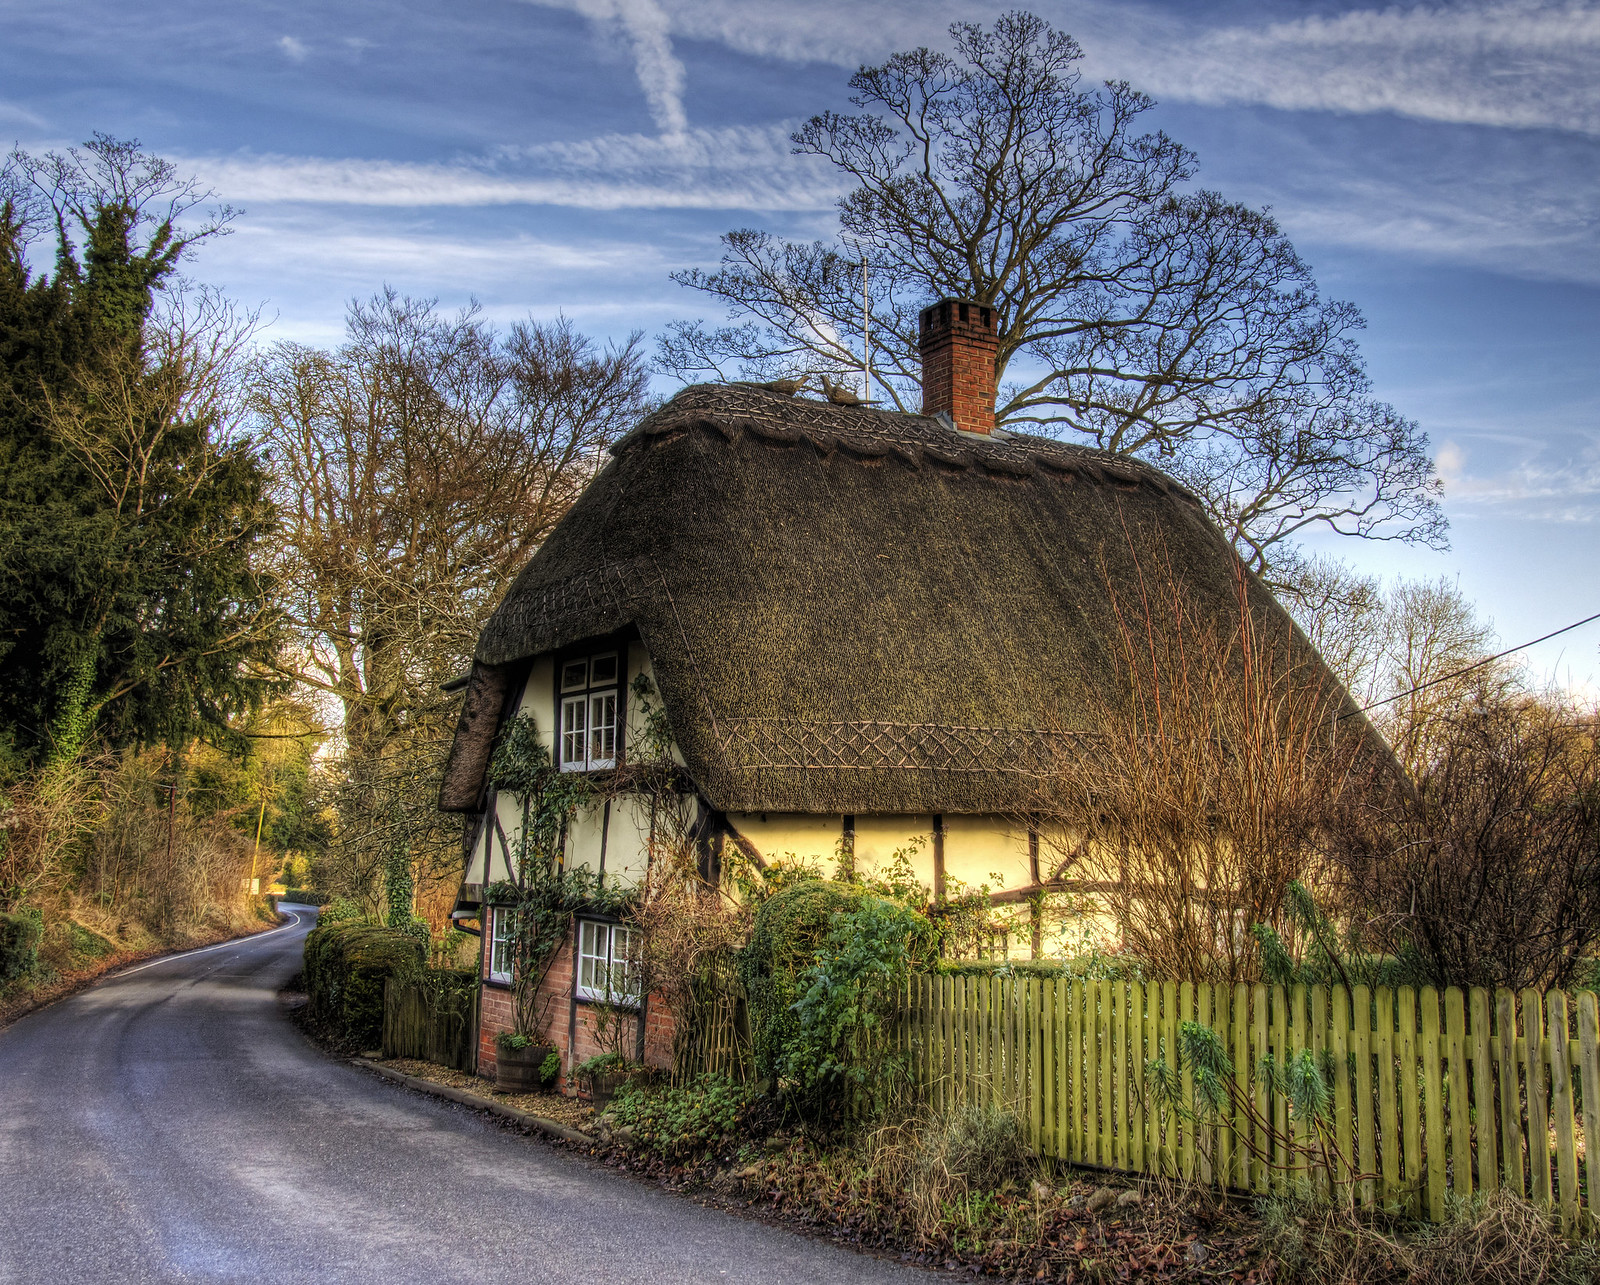 17 Gorgeous Historic English Thatched Cottages | Luxury Architecture